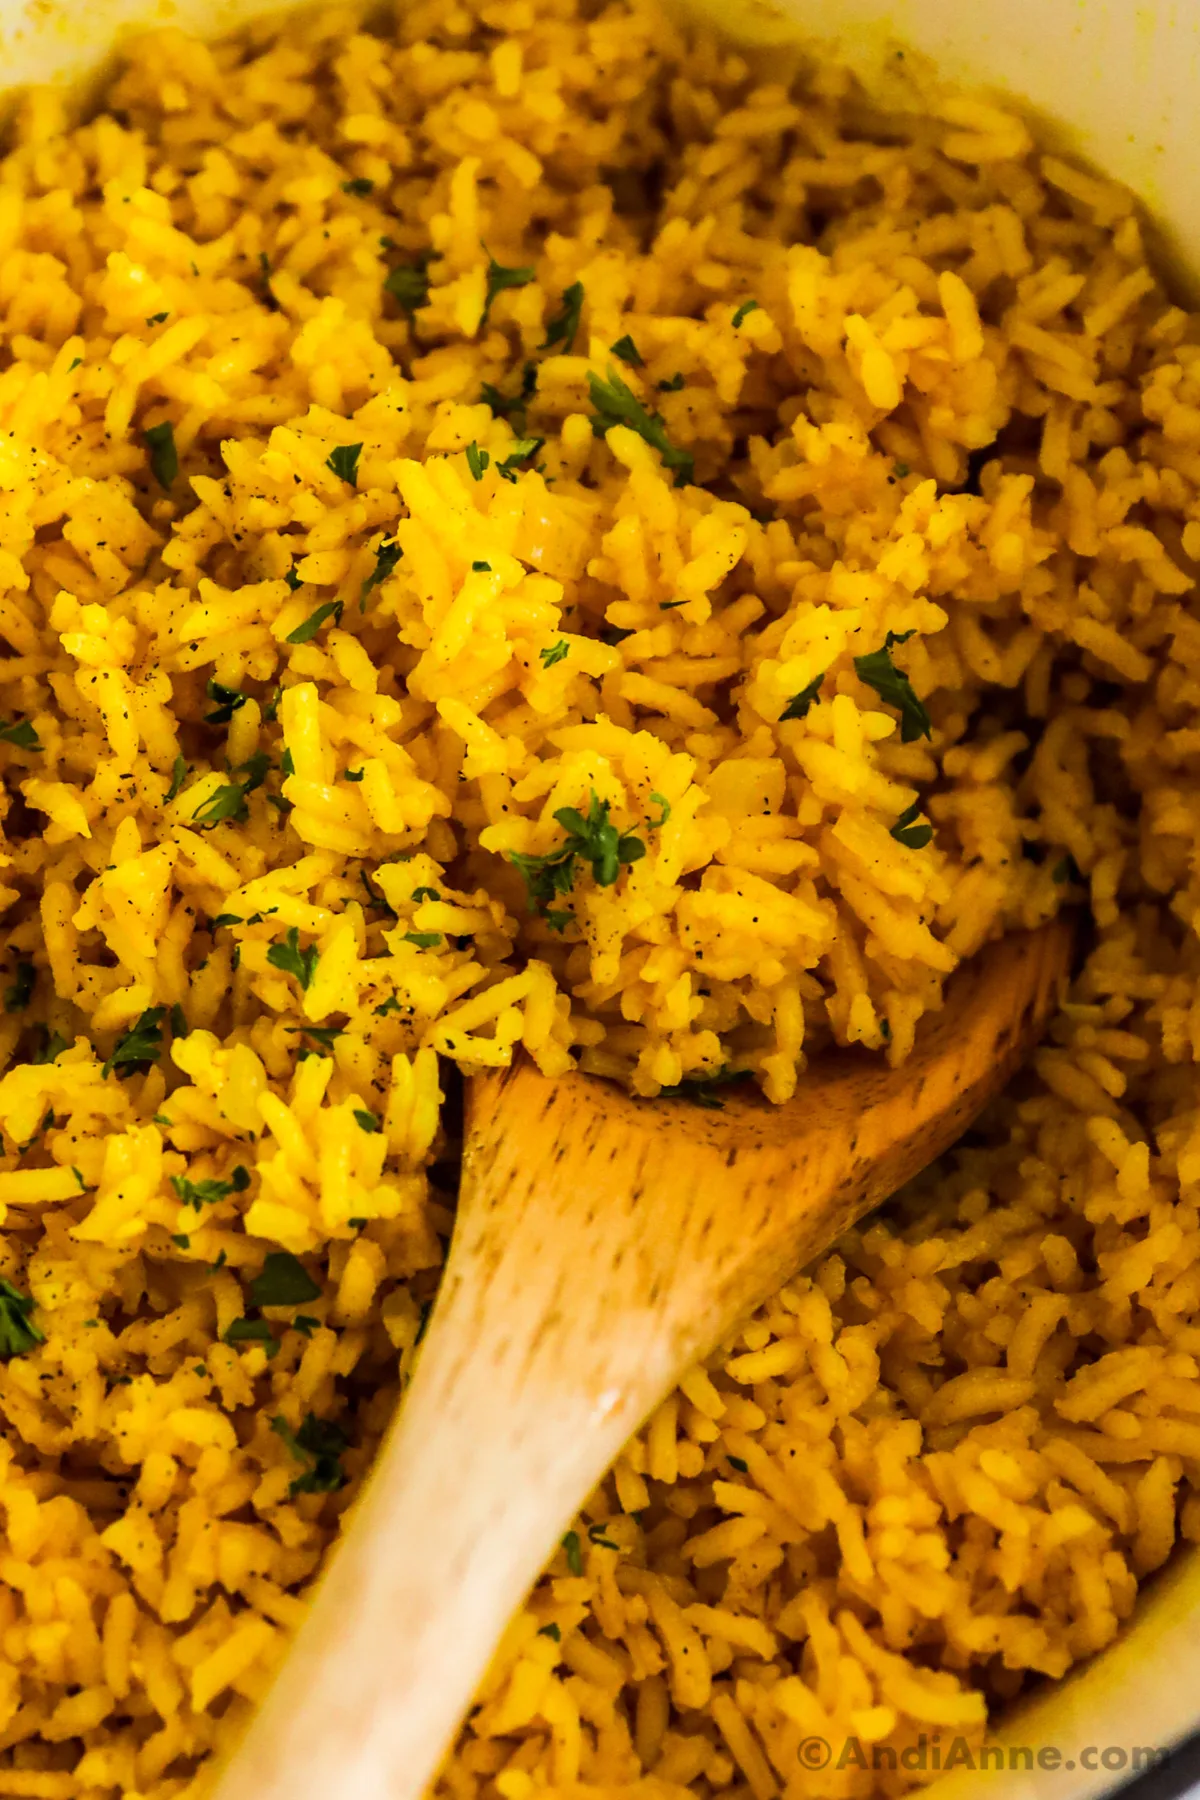 Detail photo of yellow turmeric rice with a wood spoon and bits of chopped parsley.